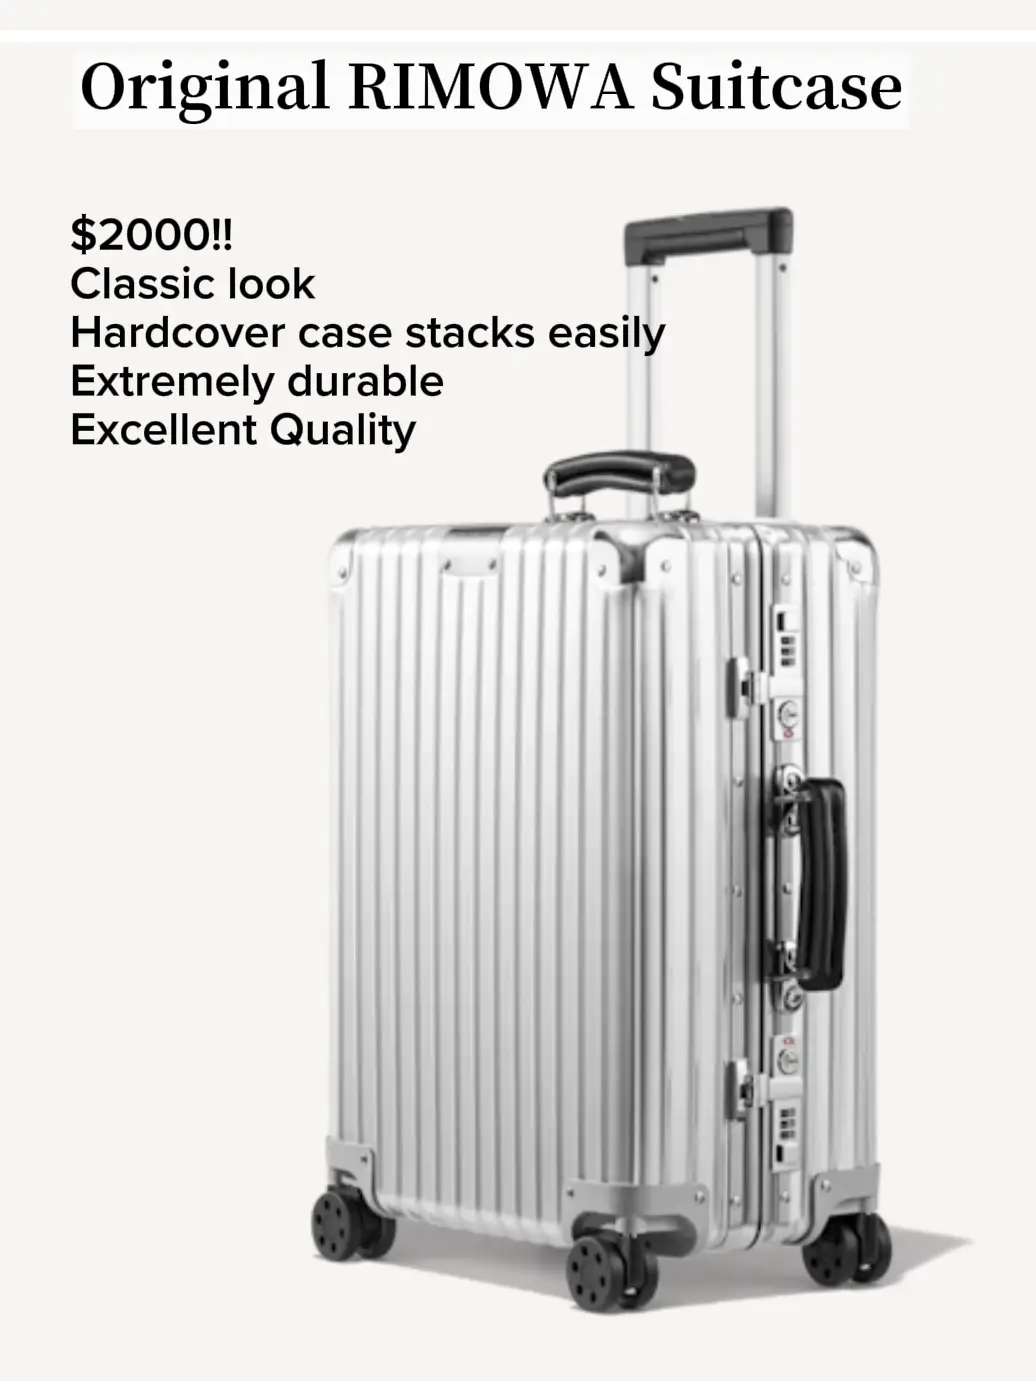 RIMOWA Original Luggage! Is It Worth $6,000 ? Full Details and